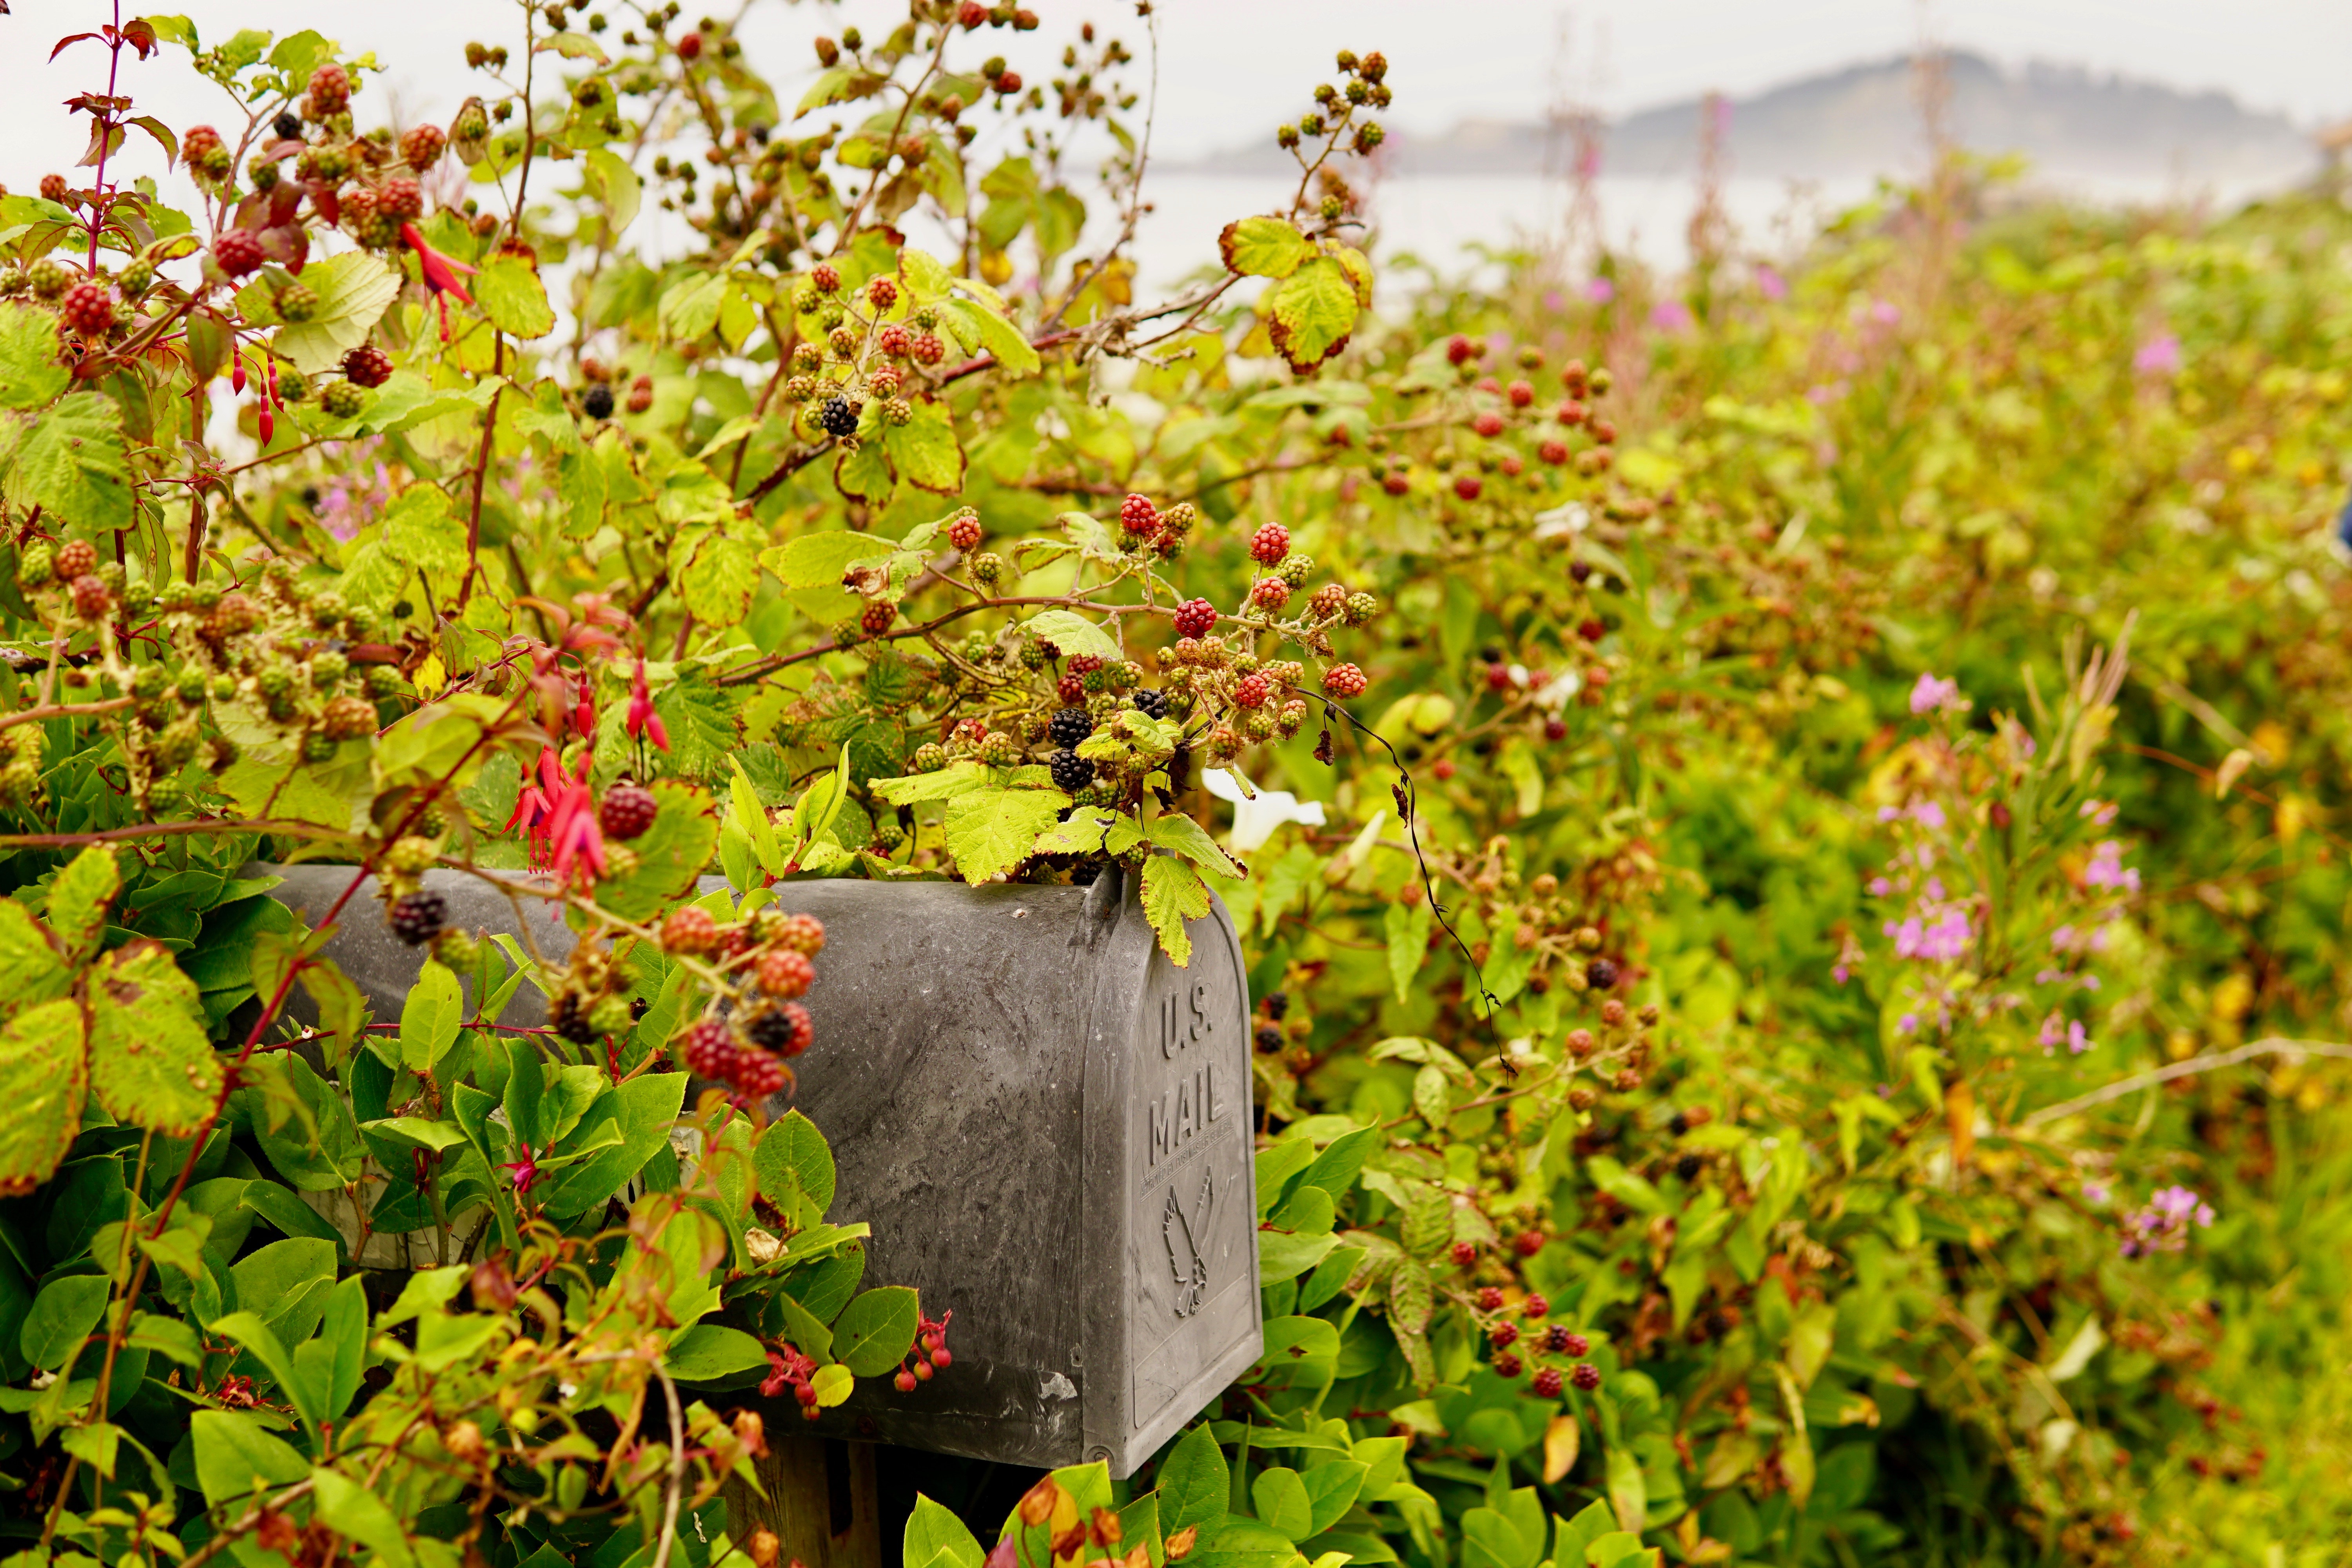 Image of a mailbox surrounded by blackberry bushes